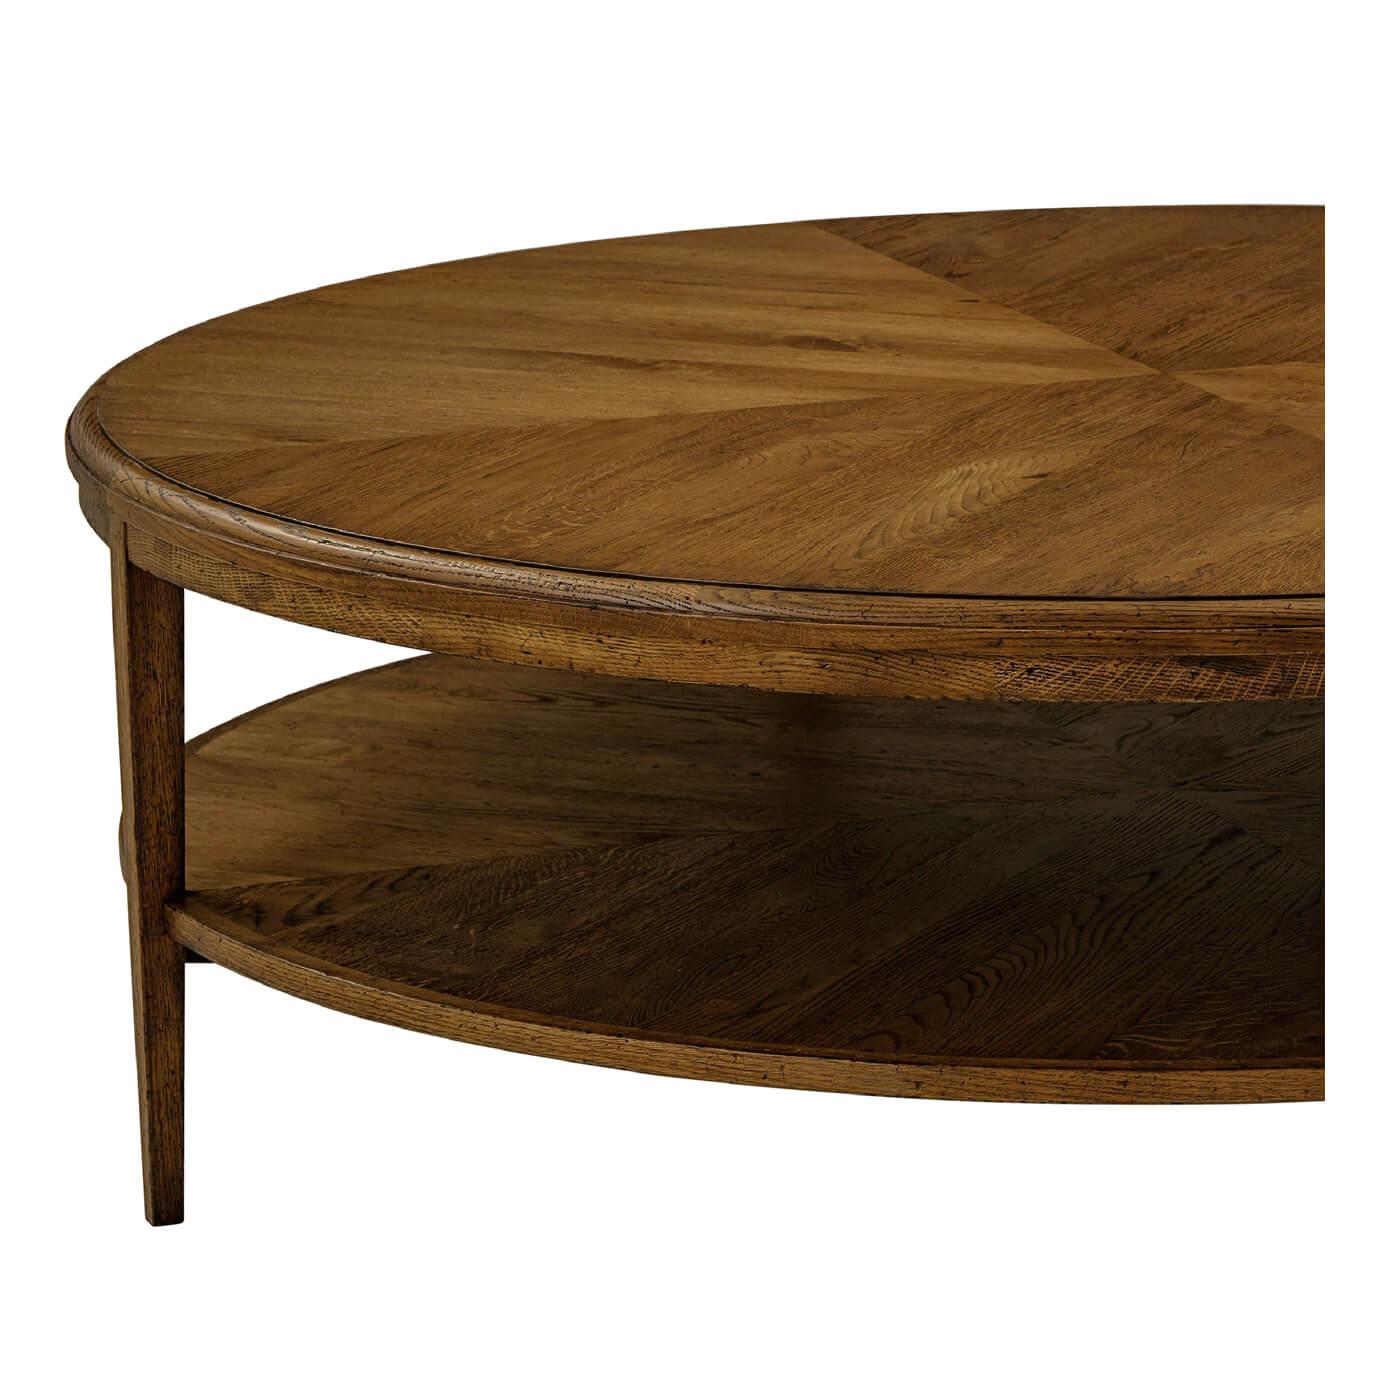 A modern dark oak parquetry round coffee table with a concentric oak sitting on a tapered oak leg. Finished in our dark oak Dusk finish.

Dimensions: 52